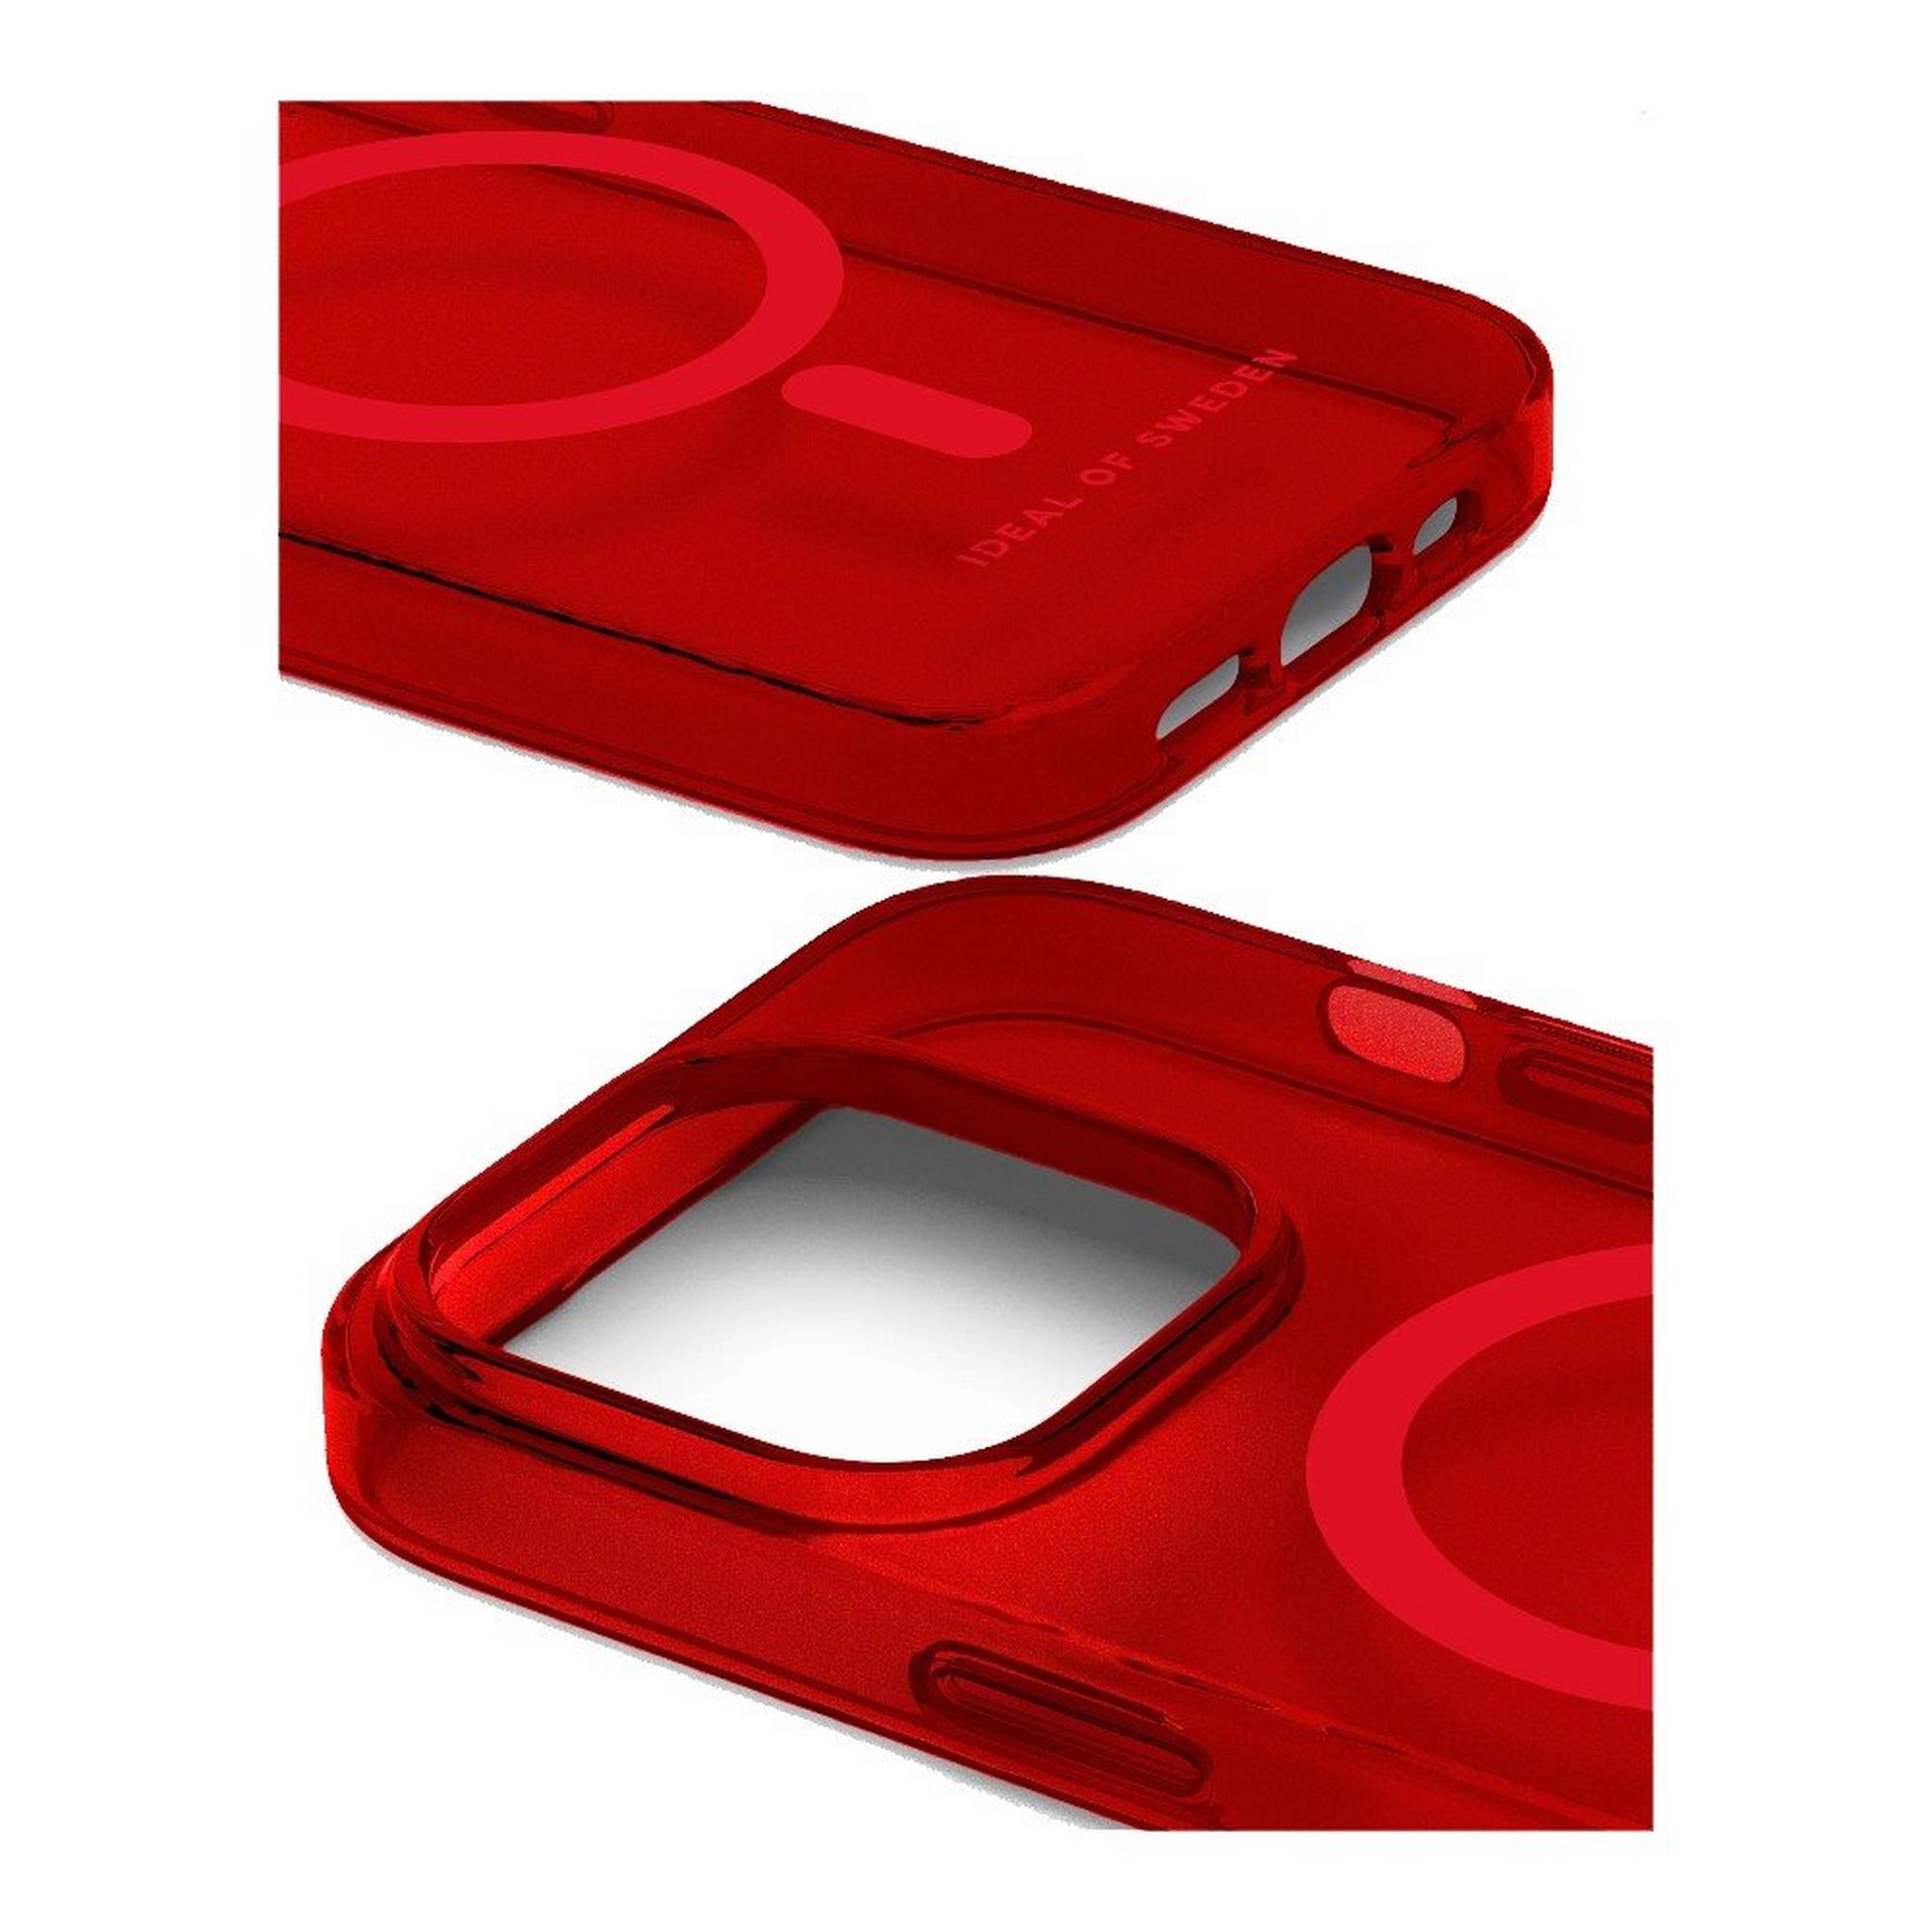 Ideal of Sweden iPhone 15 Pro MagSafe Case - Radiant Red